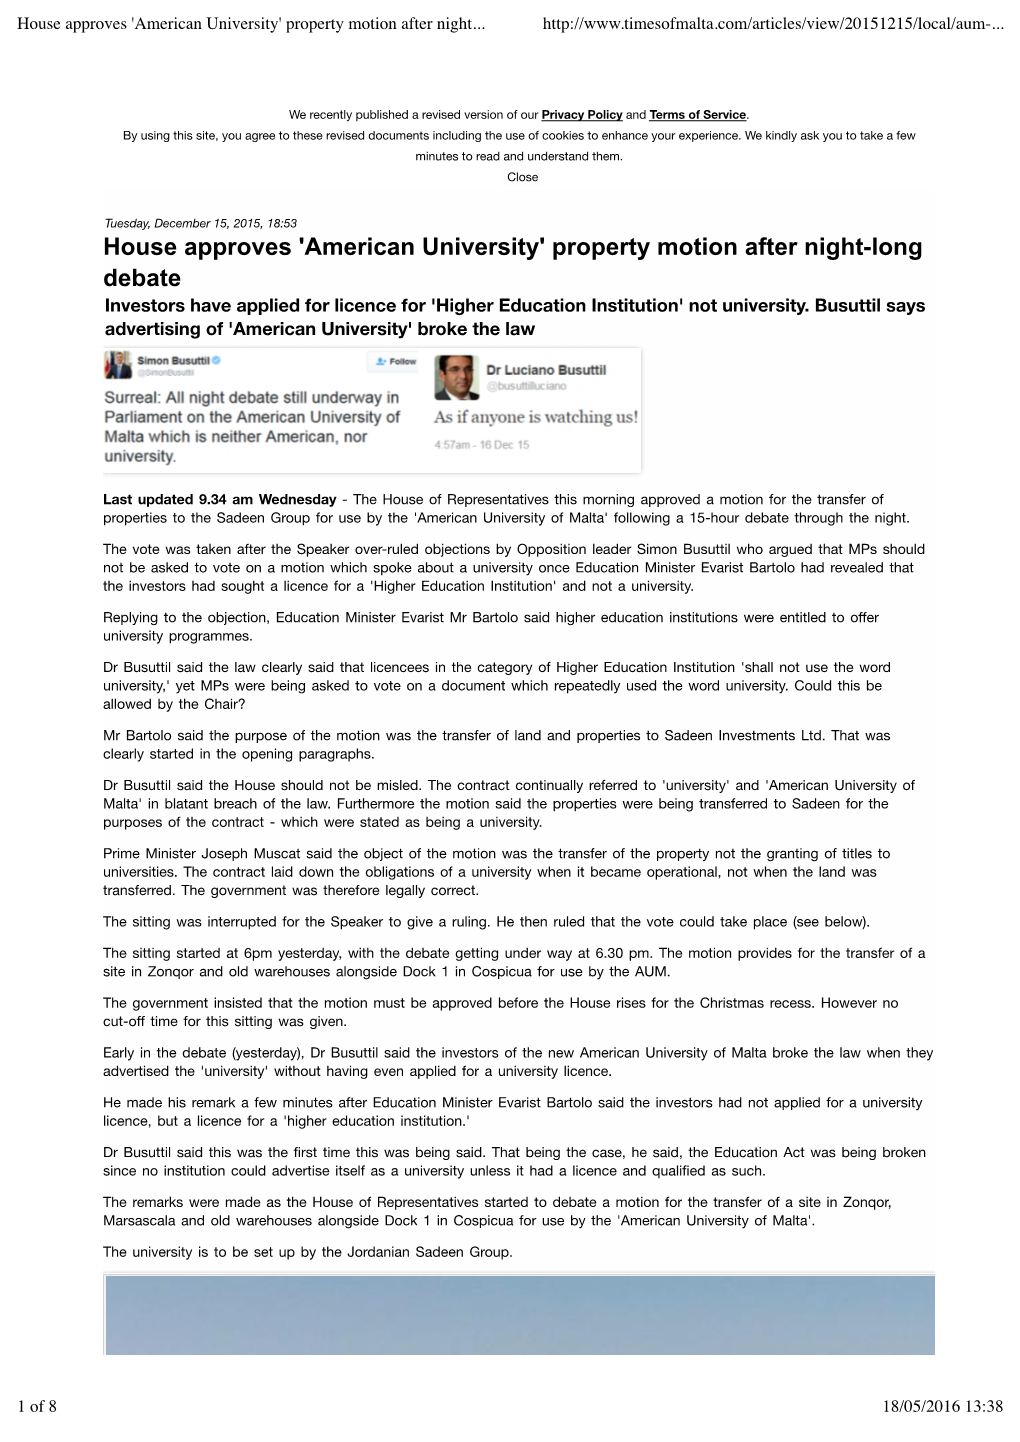 House Approves 'American University' Property Motion After Night